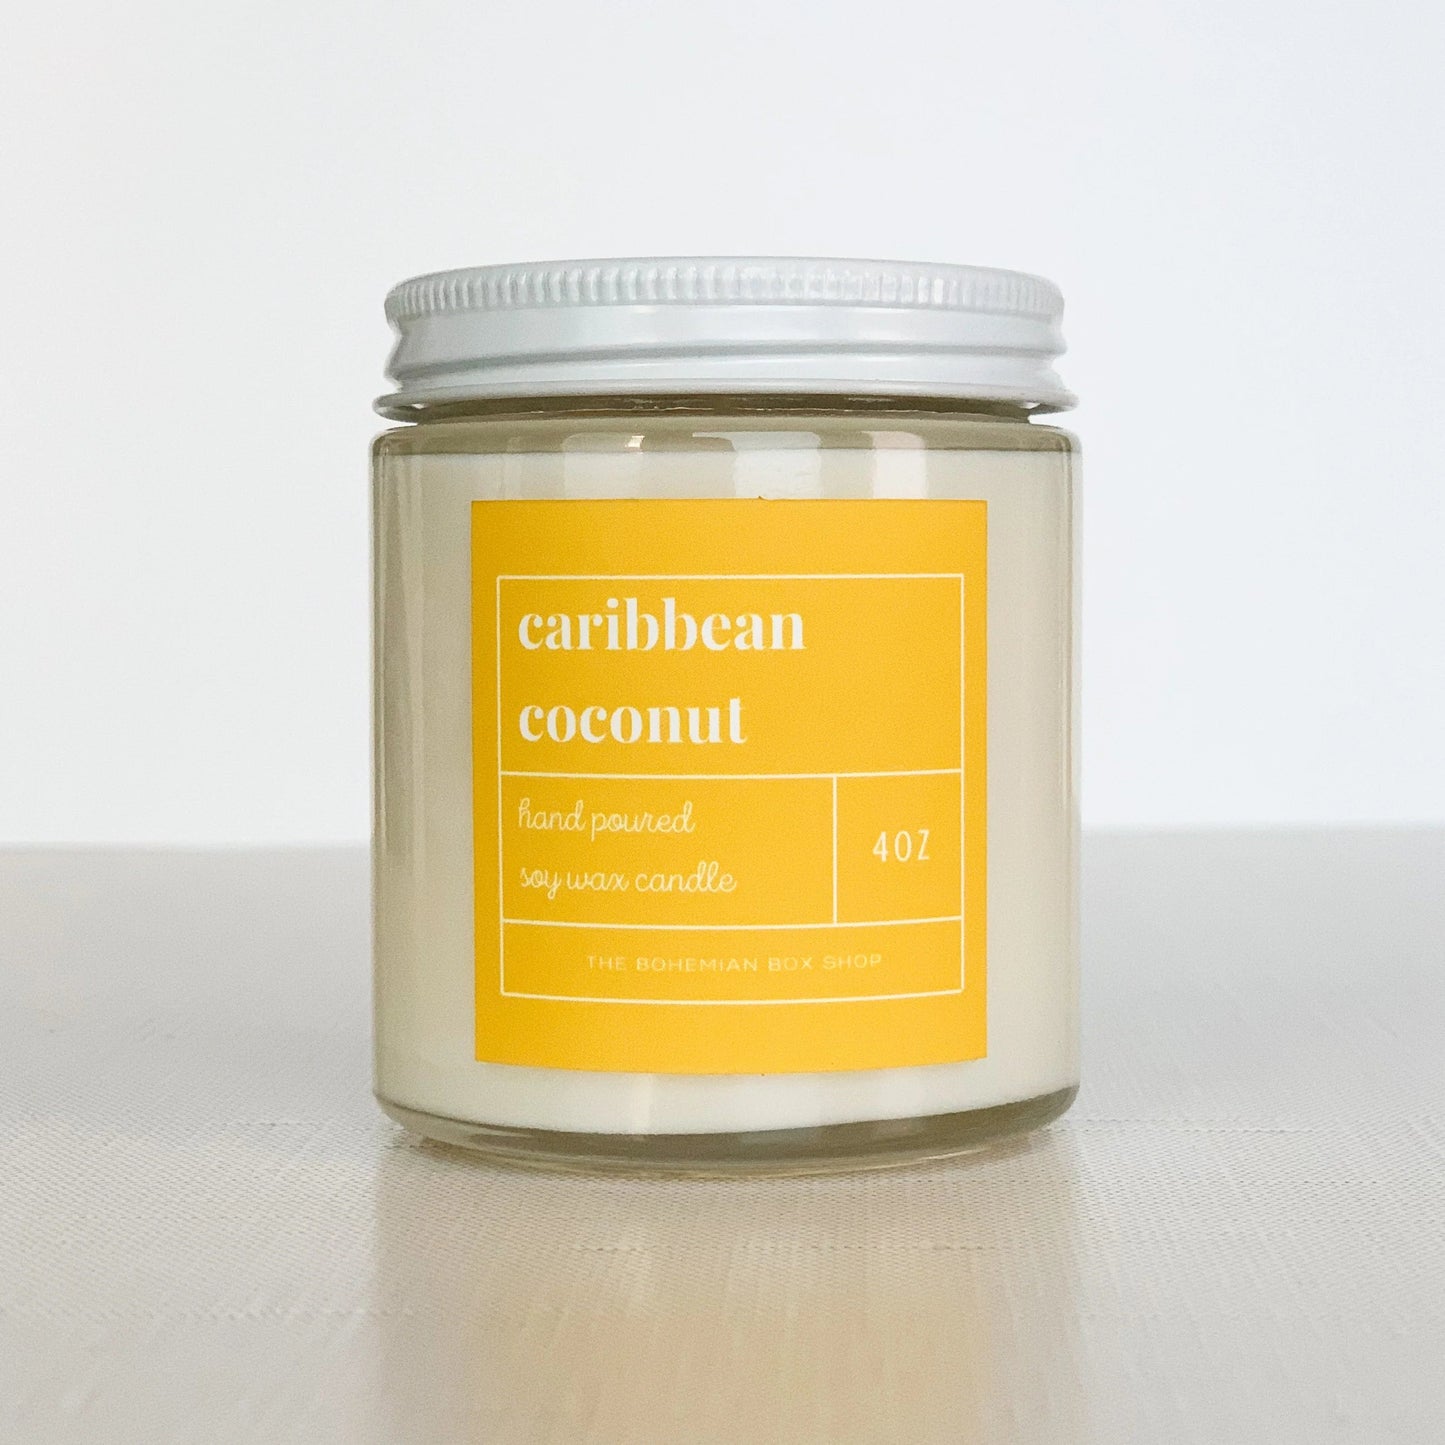 4 ounce Caribbean coconut soy candle with yellow label, clear jar, and white lid.